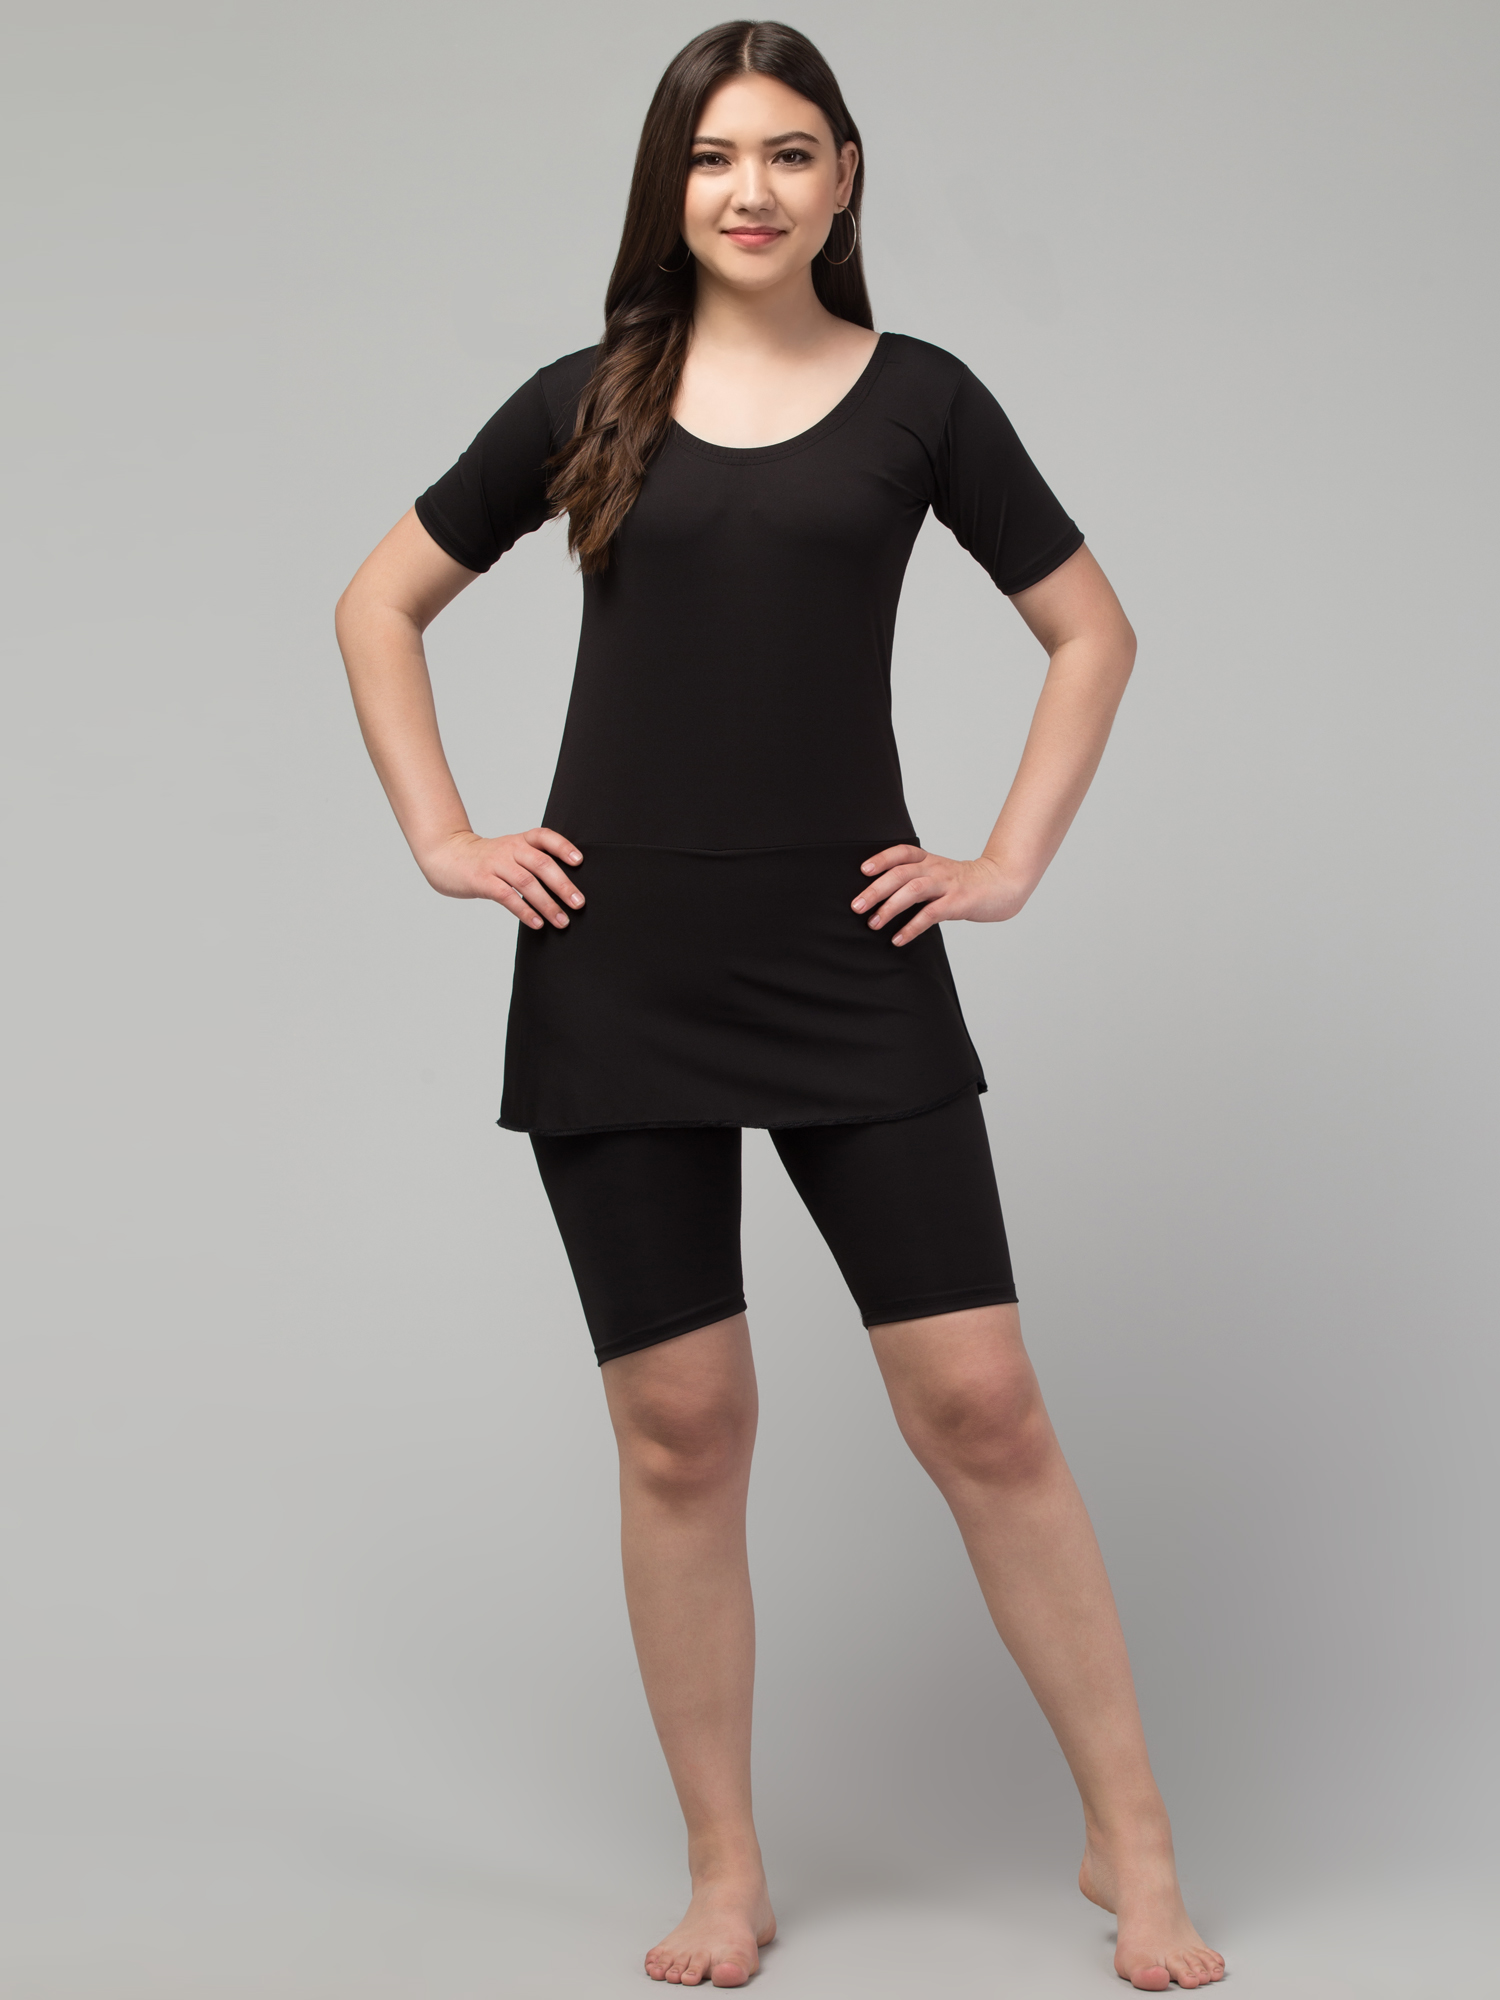 Black solid swimming dress, has a round neck, short sleeves, and attached shorts